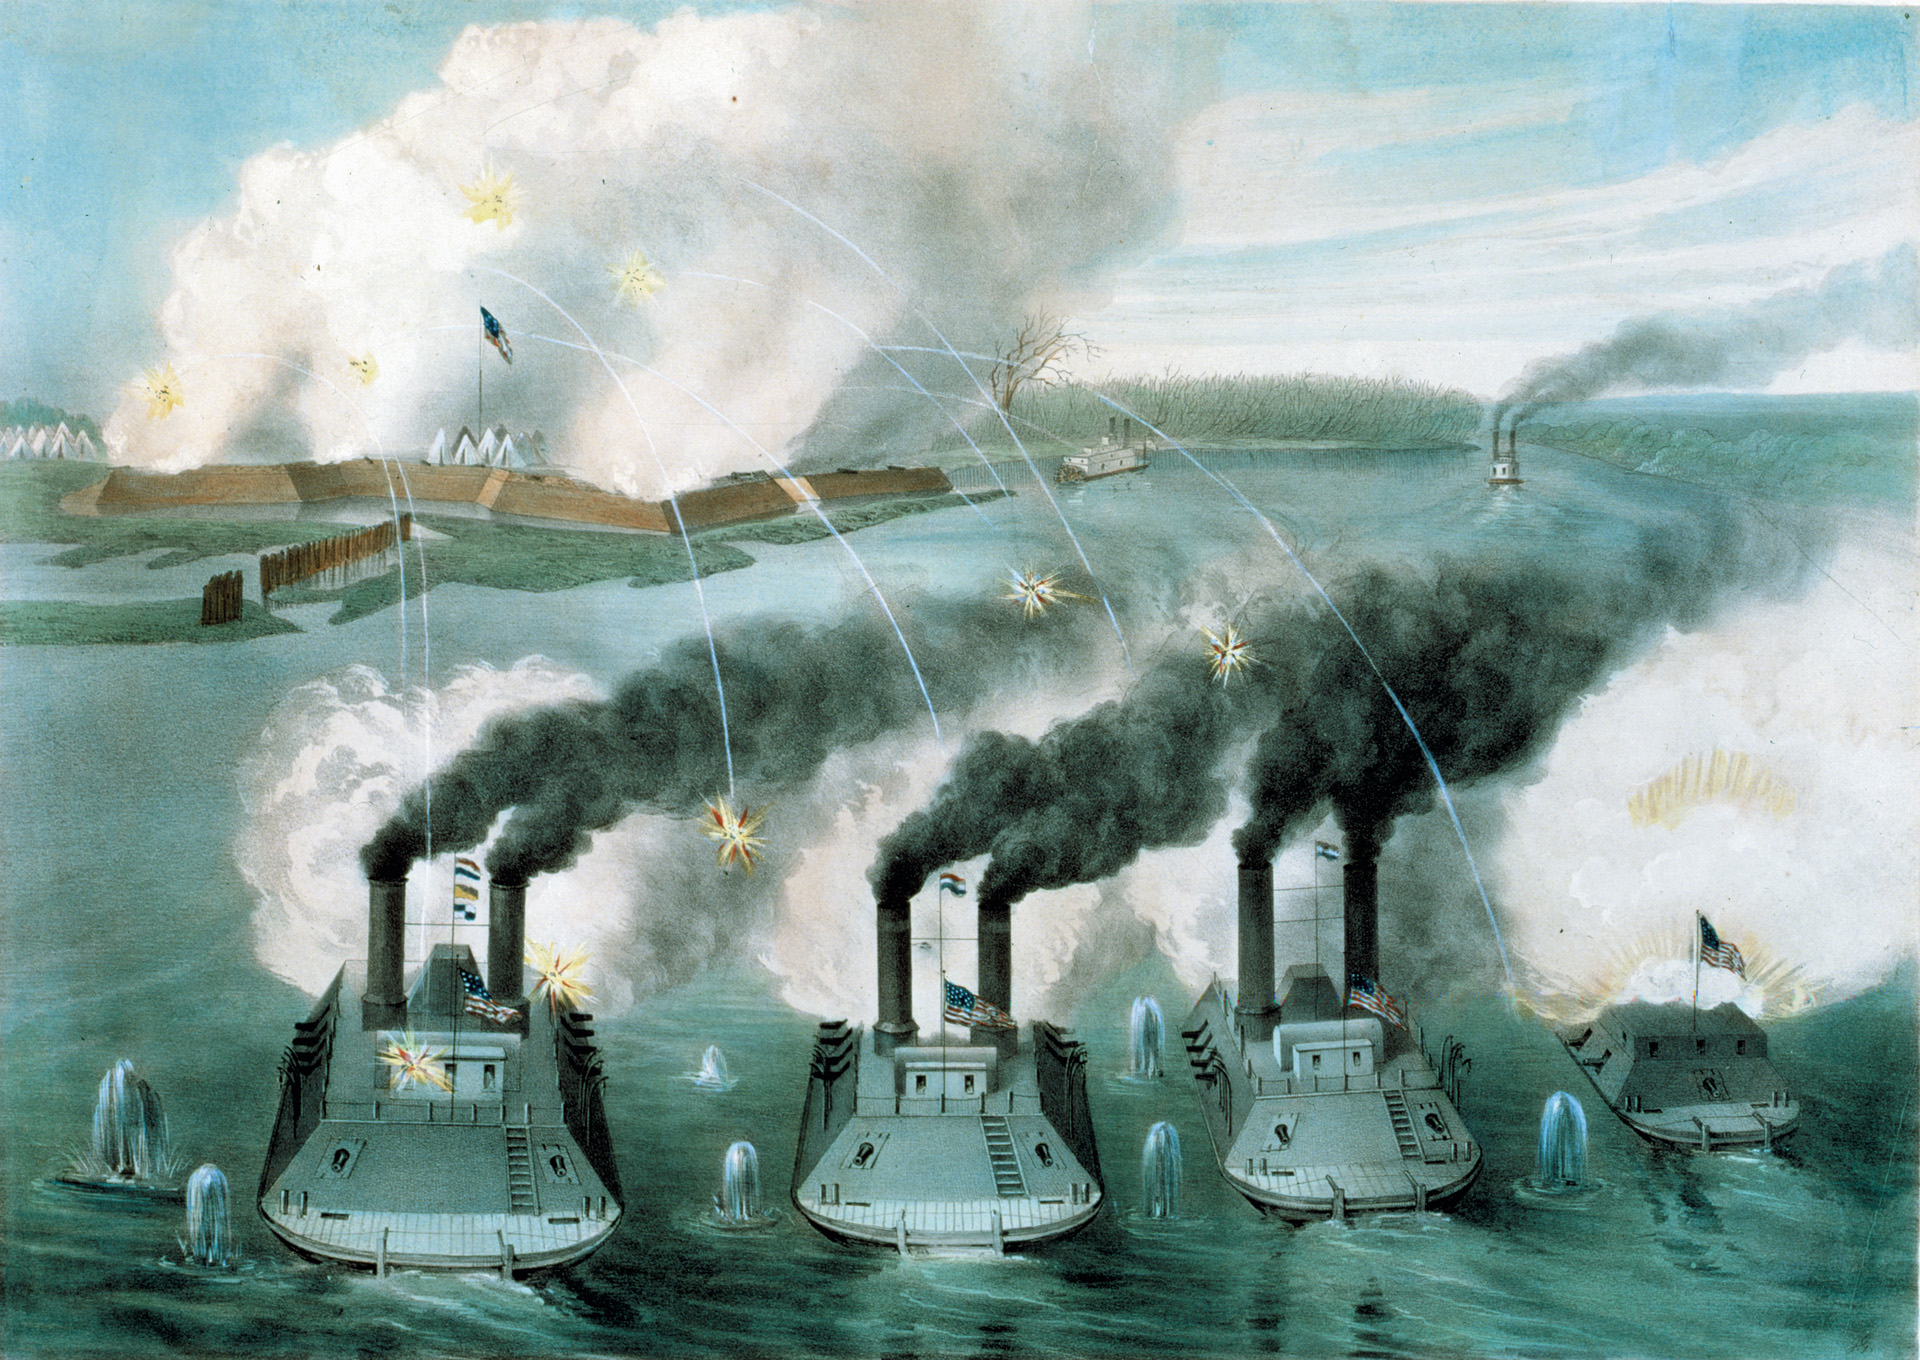 Union gunboats bombard Fort Henry on the Tennessee River. They are, from left to right, the St. Louis, Carondelet, Cincinnati, and Essex. Two Confederate boats flee south, up the river. The Union bombardment, unassisted by a land assault, was successful. Although the artist has shown otherwise, the three largest gunboats were exactly the same size. 